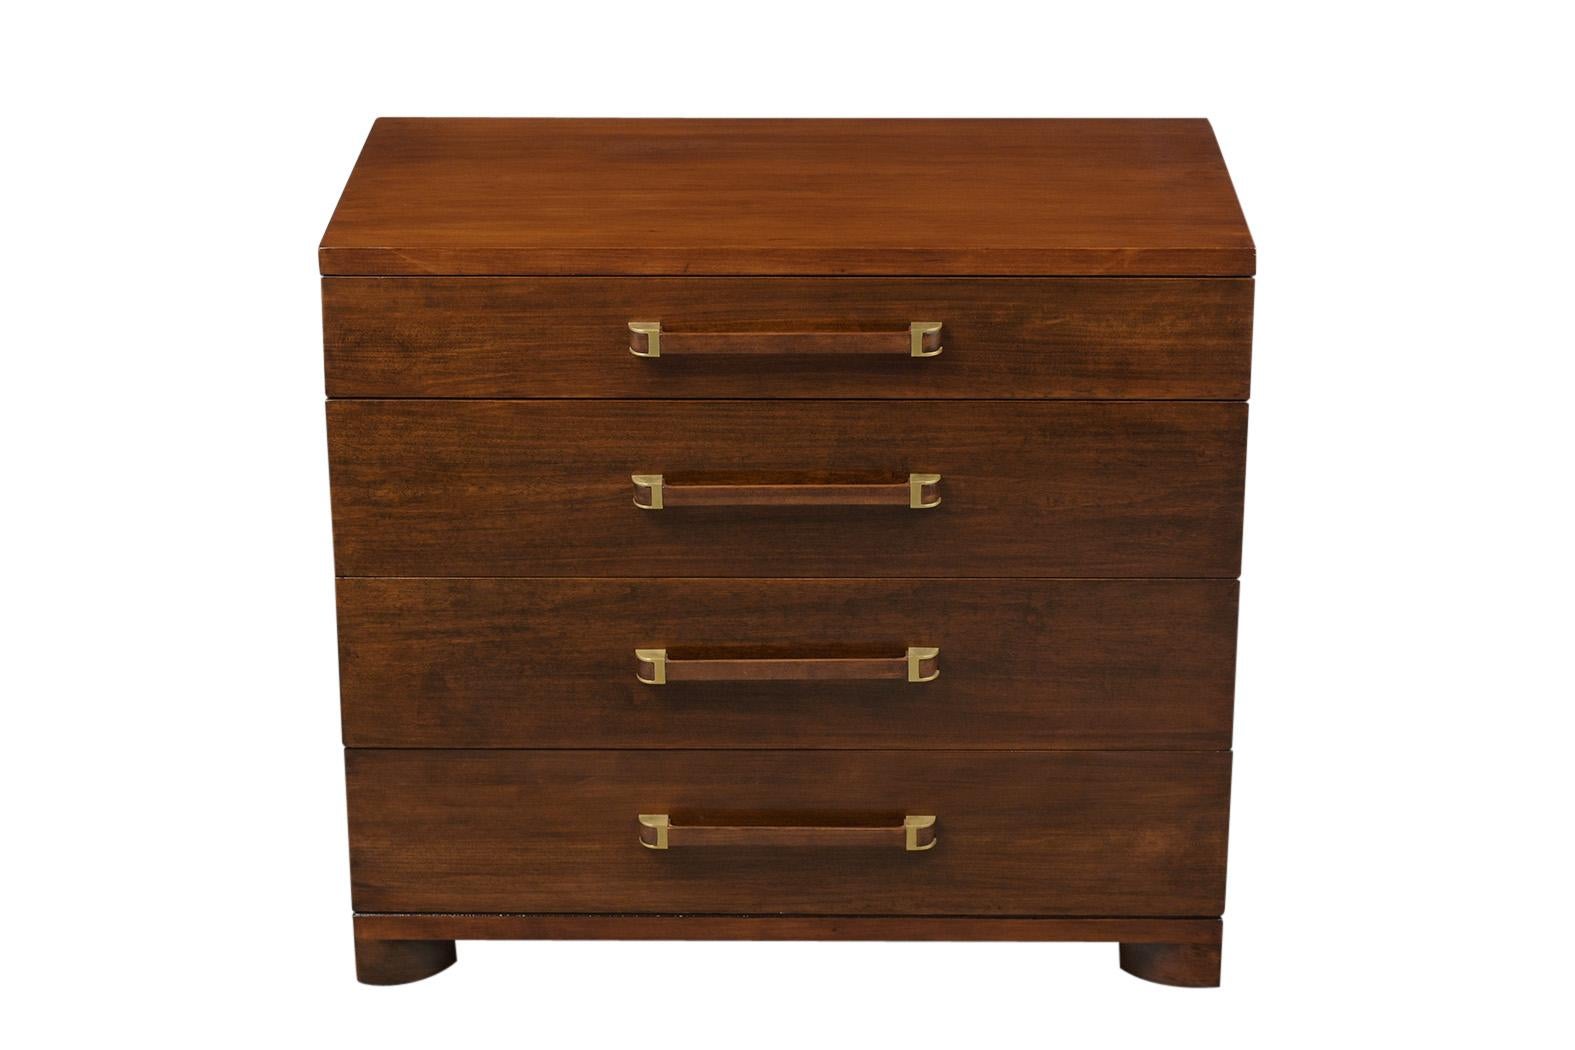 This is a 1960s dresser. Made by John Widdicomb Company, using solid walnut wood. That has recently been stained in a rich walnut color, with a lacquered finish. Dresser features 4 vertical drawer. The first drawer has dividers, the next 3 drawers